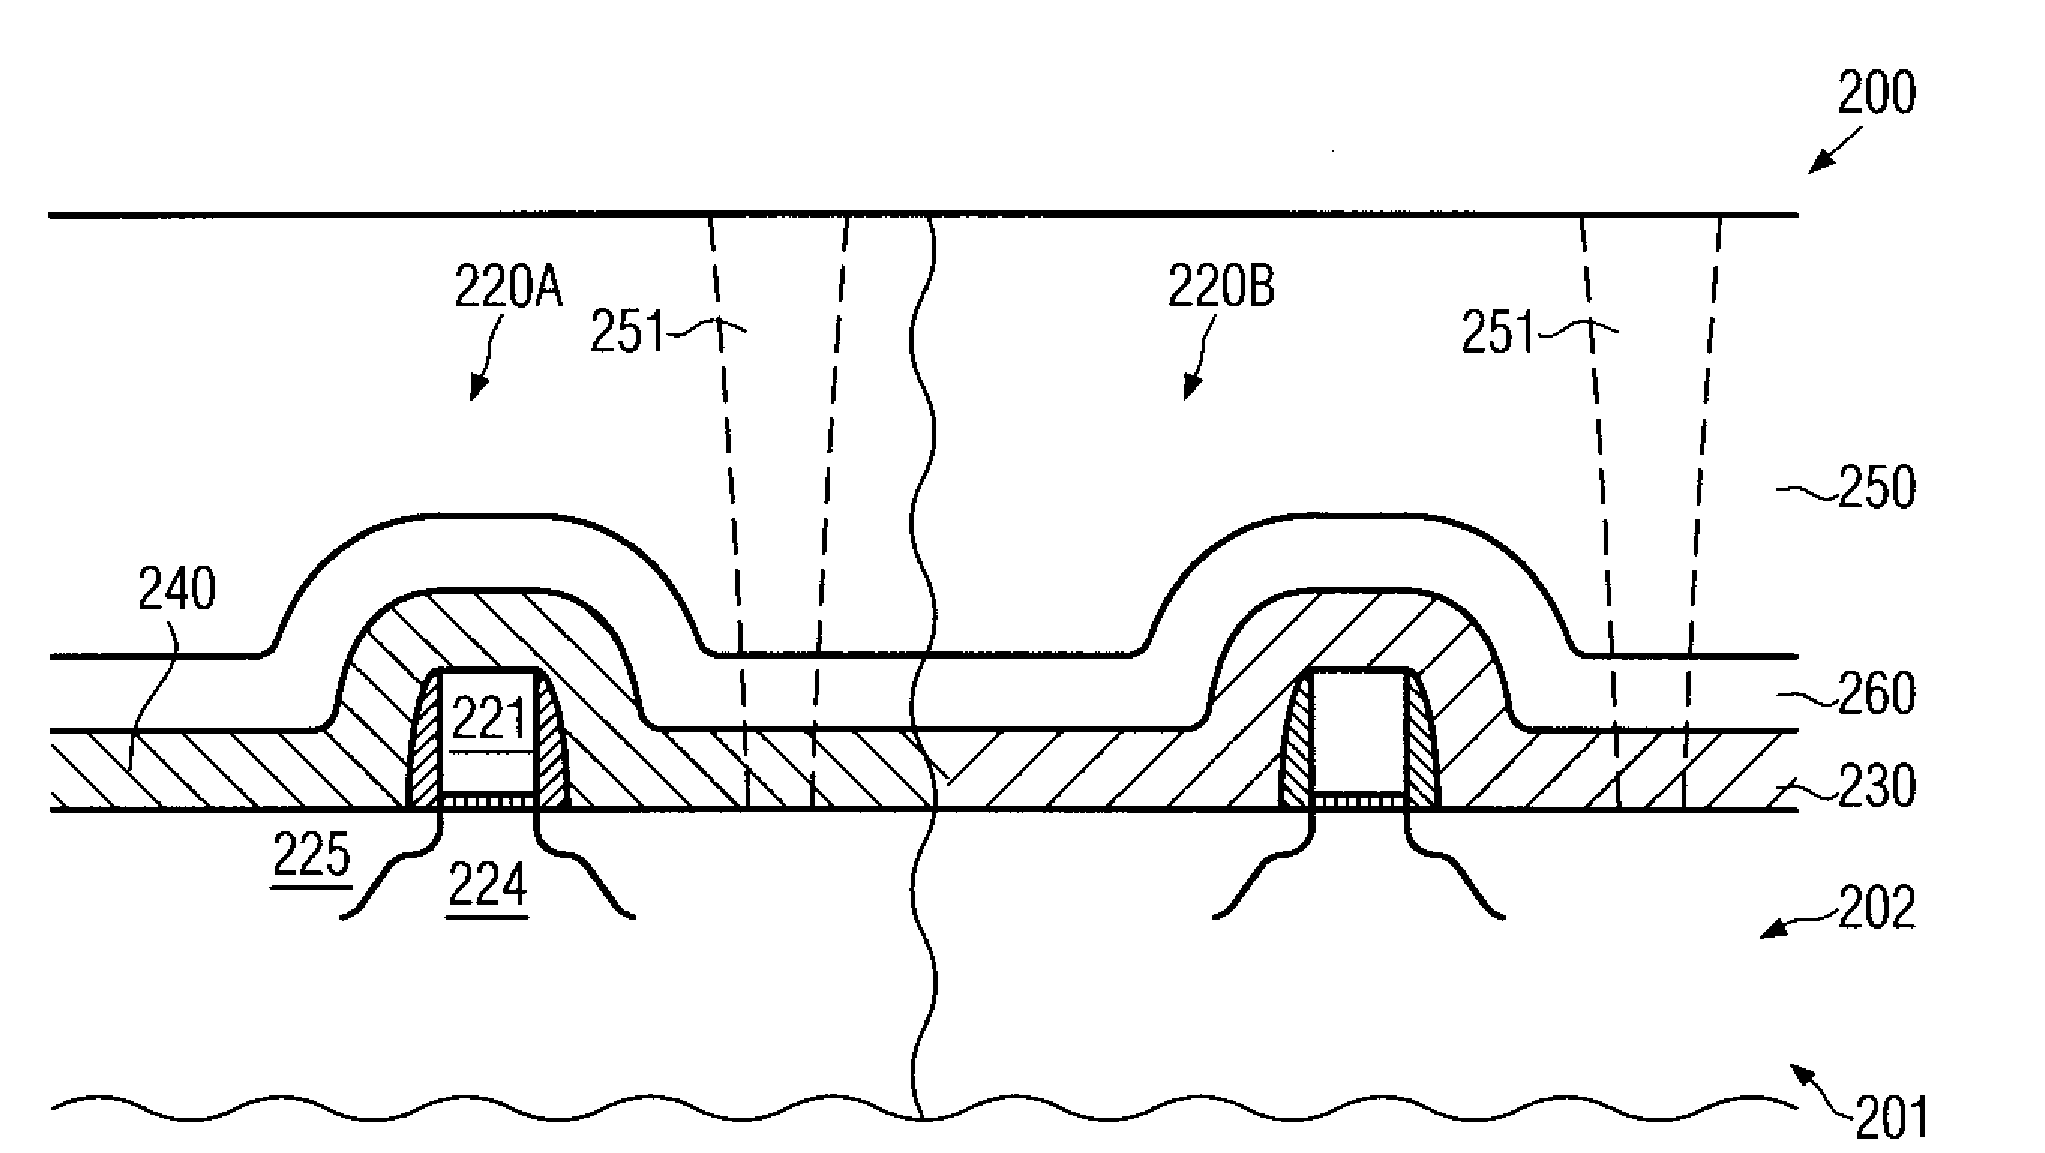 Enhanced transistor performance of n-channel transistors by using an additional layer above a dual stress liner in a semiconductor device